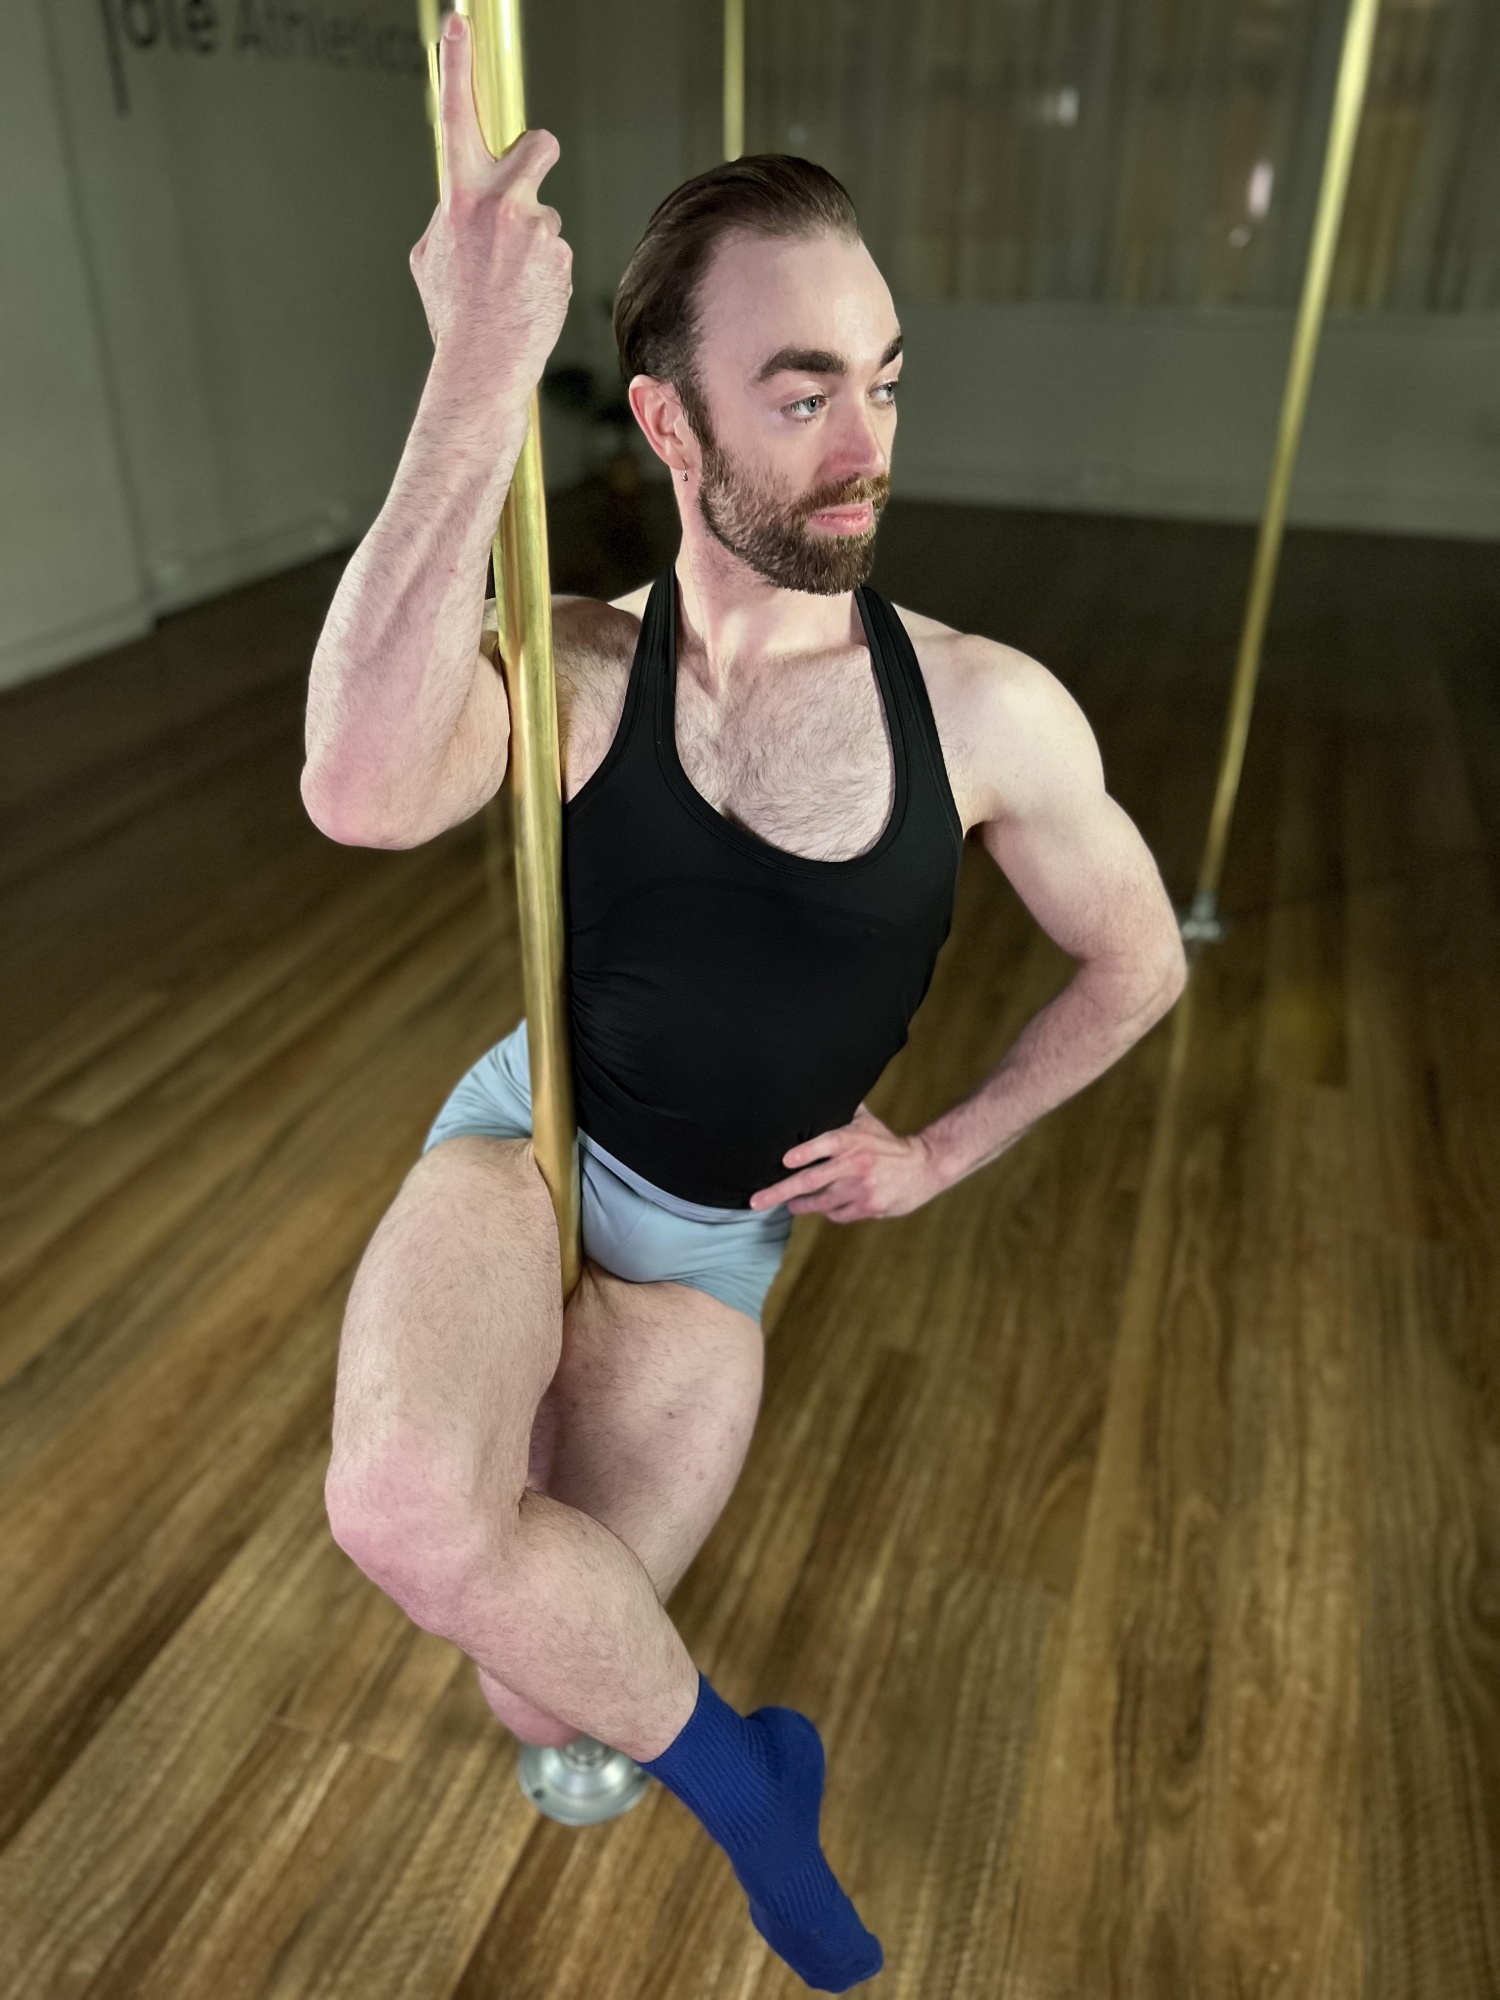 Pole Fitness: Benefits & Basics To Know Before Finding Pole Classes